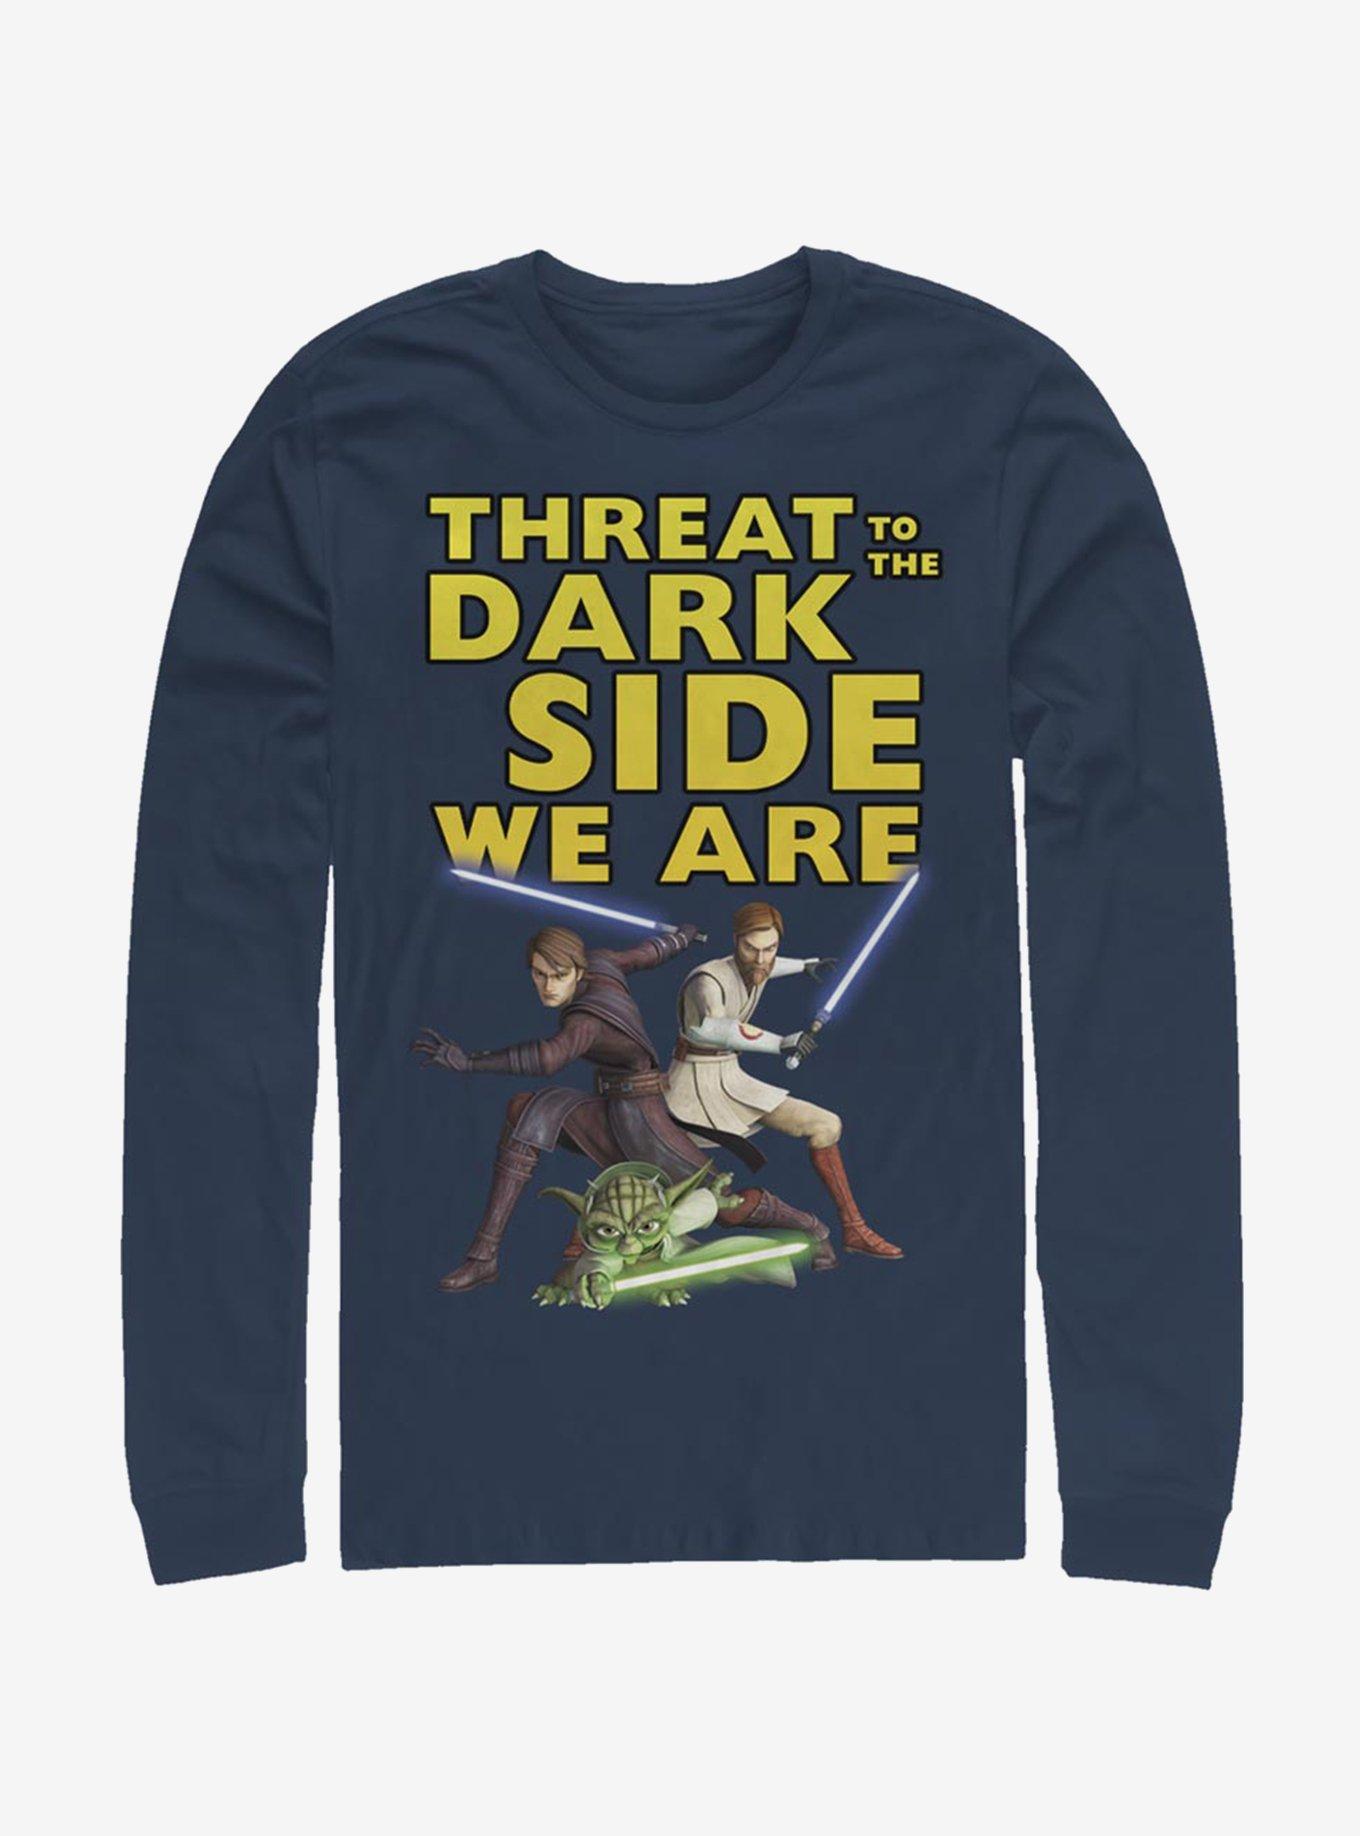 Star Wars The Clone Wars Threat We Are Long-Sleeve T-Shirt, NAVY, hi-res